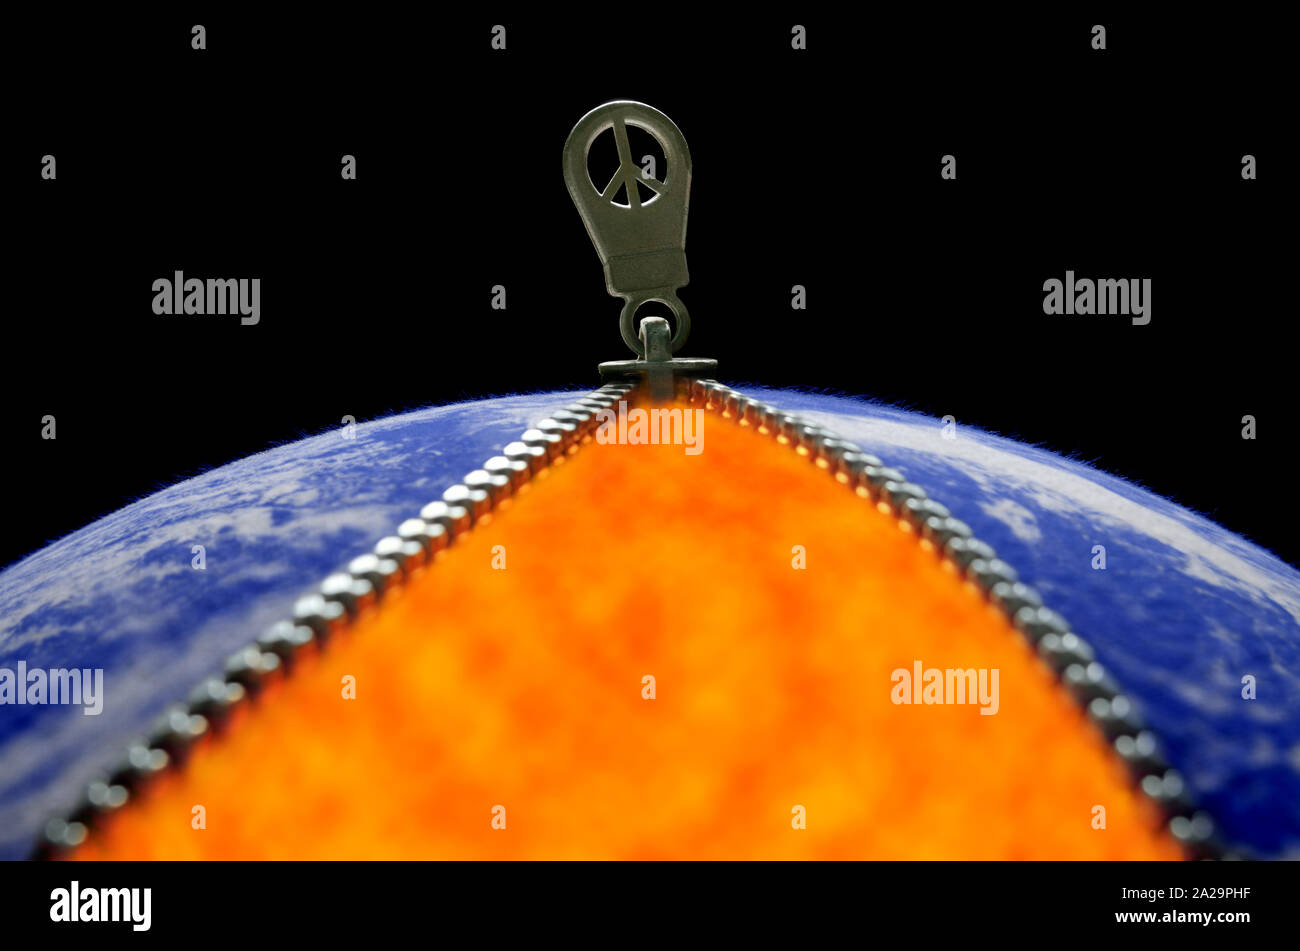 World peace, illustrated by Earth-like fabric ball with opened zipper revealing fire and peace symbol in zipper-pull. Globe image from NASA. Stock Photo